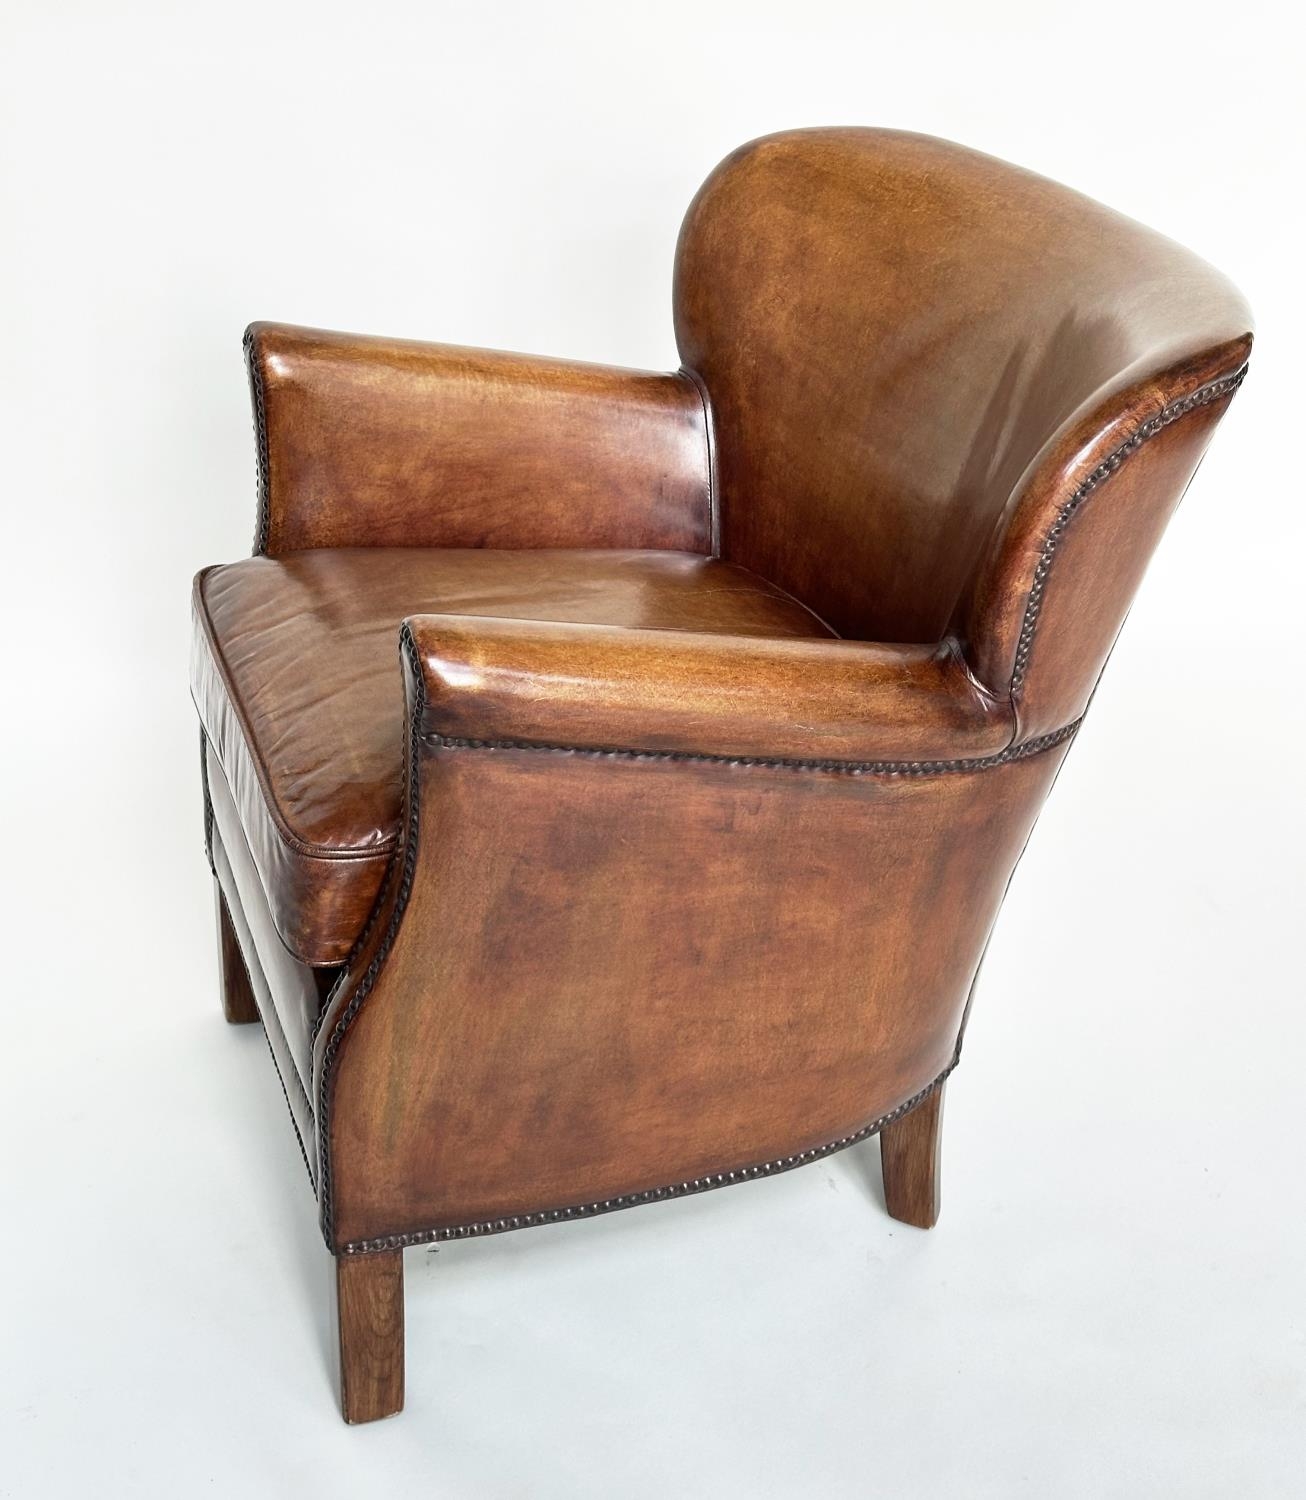 LITTLE PROFESSOR ARMCHAIR, in the manner of Timothy Oulton soft natural mid brown leather upholstery - Image 4 of 9